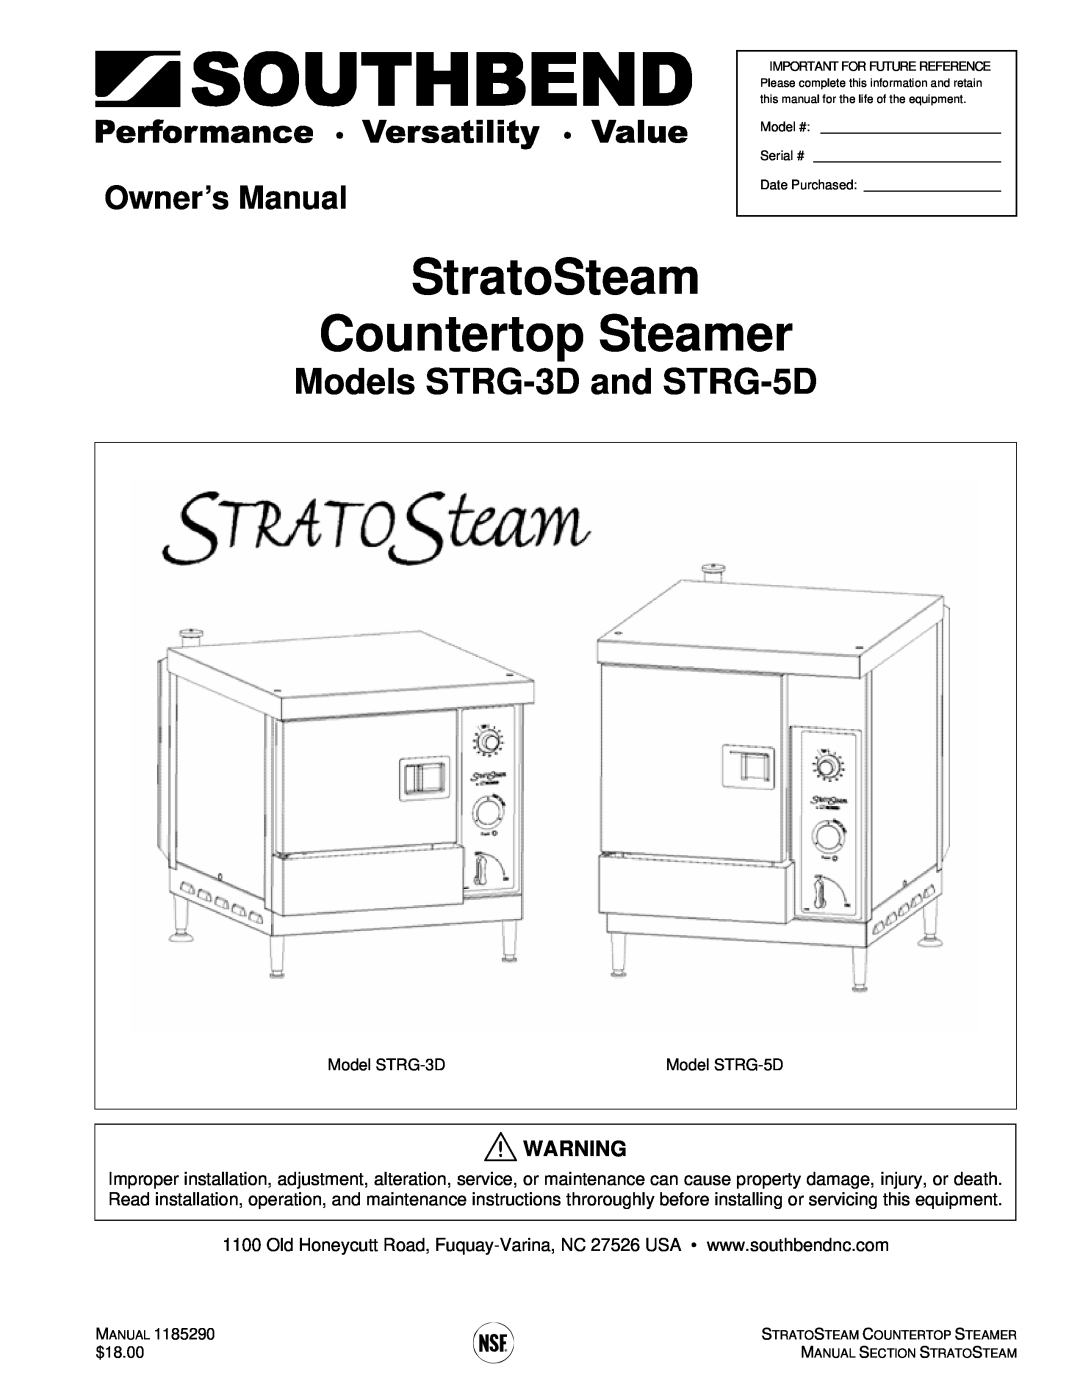 Southbend manual Models STRG-3D and STRG-5D, StratoSteam Countertop Steamer 